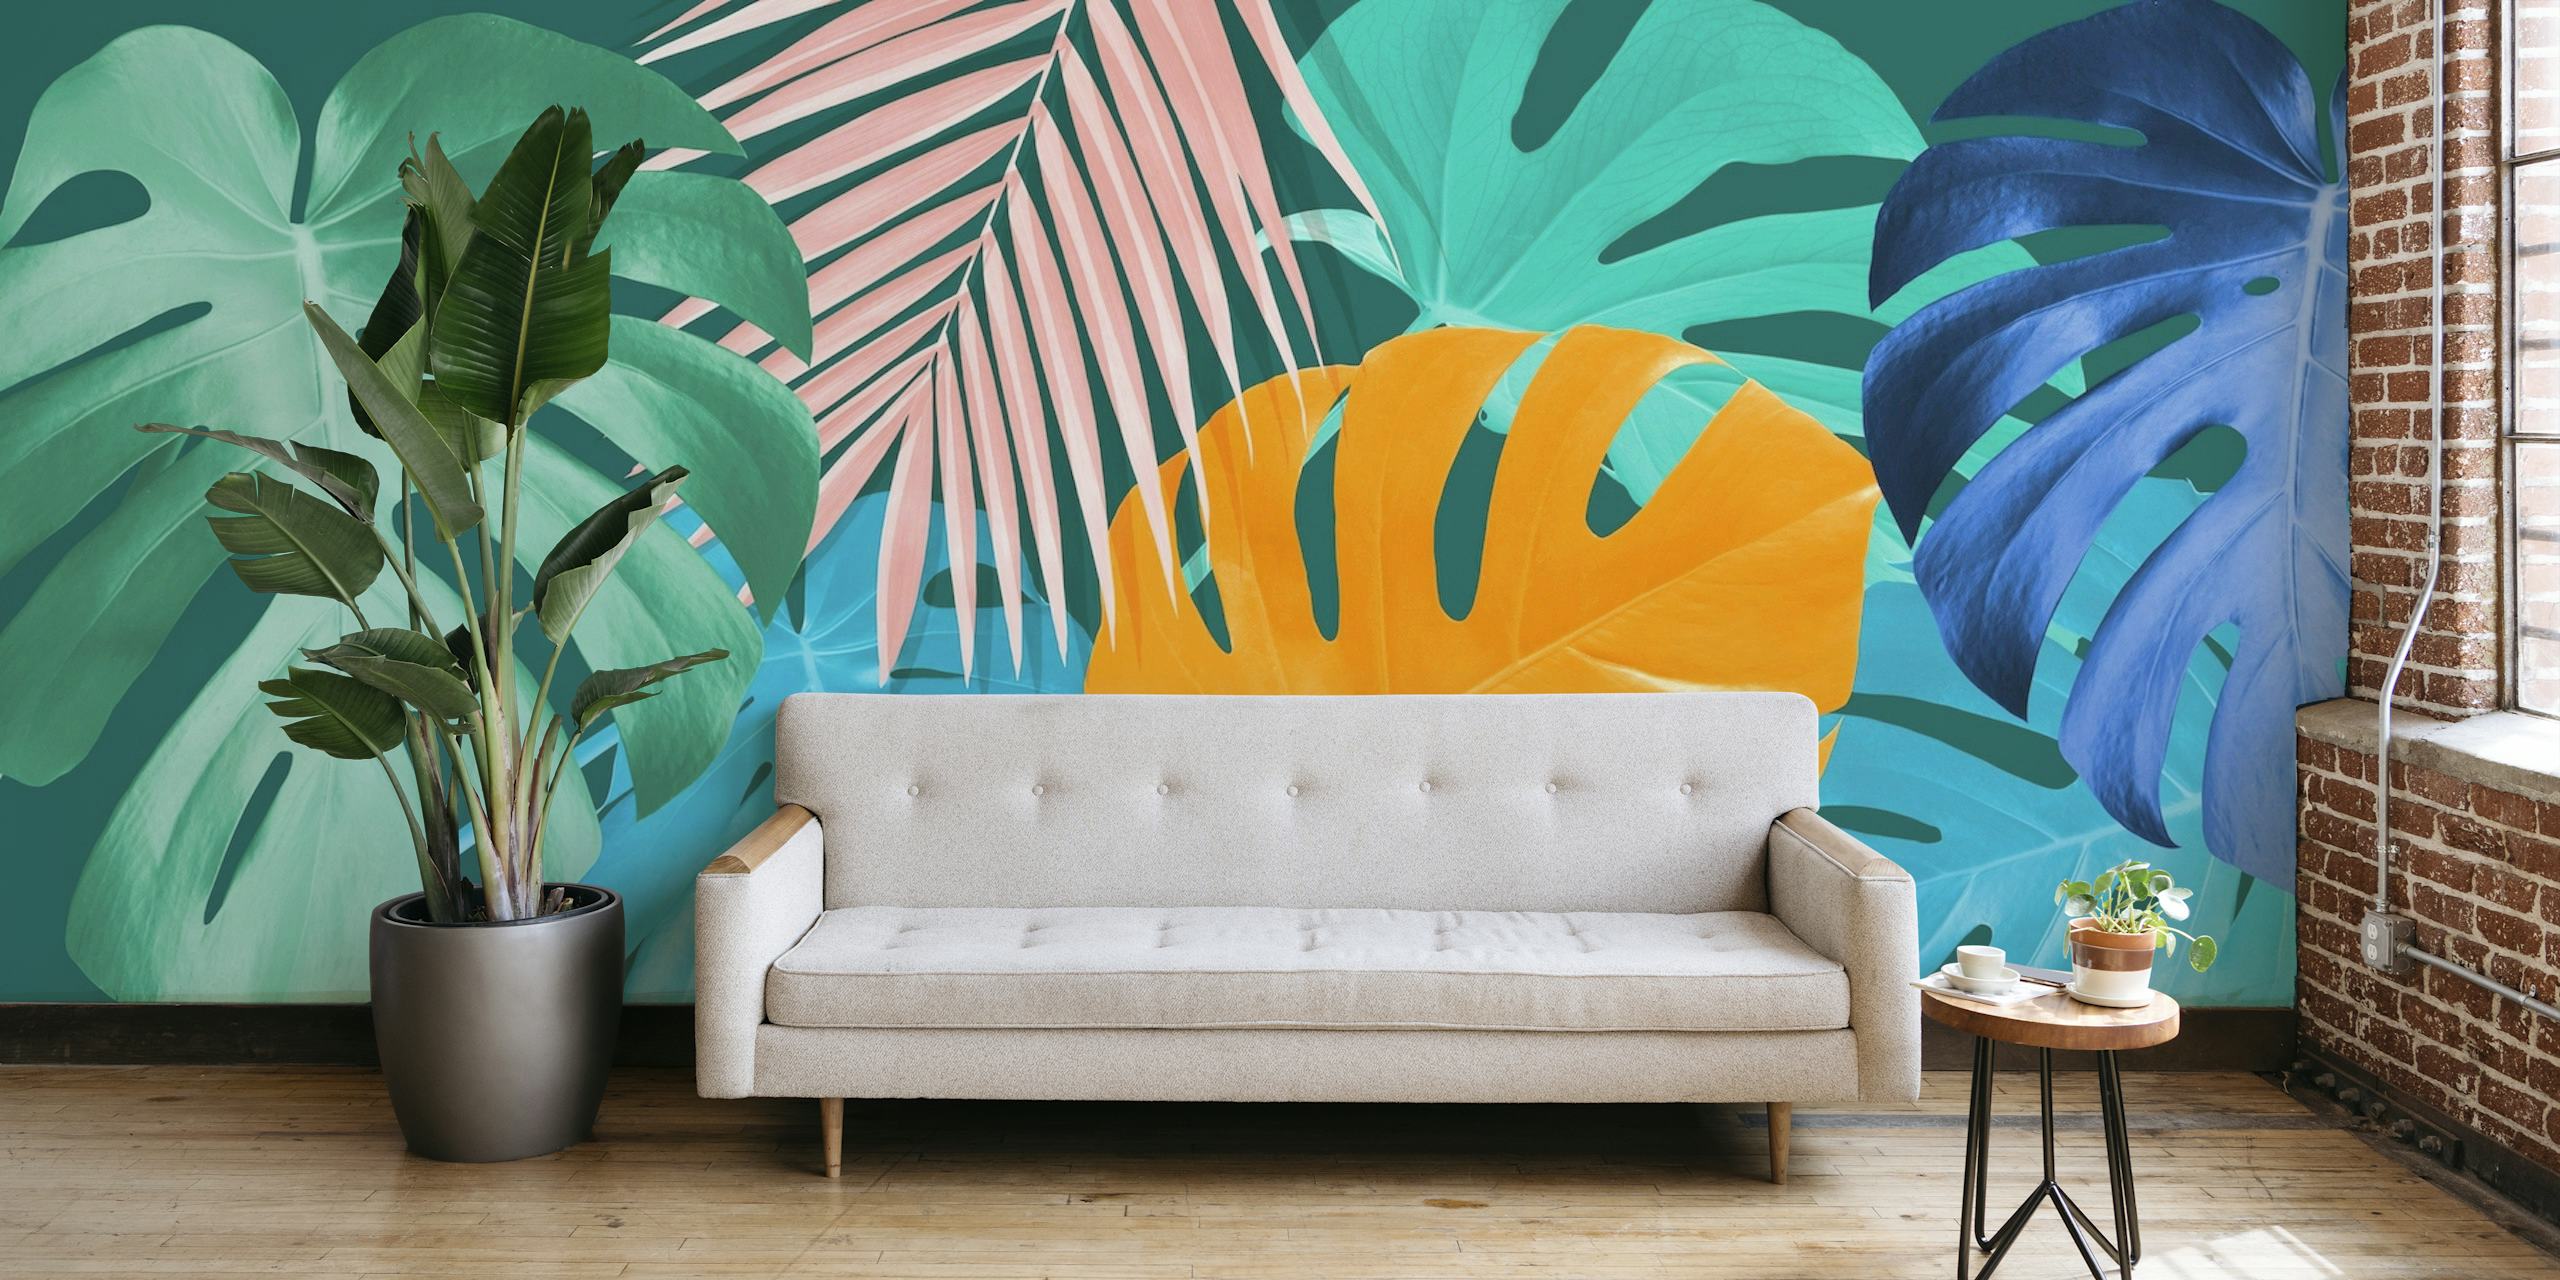 Tropical pattern wall mural with lush green, teal, and orange foliage